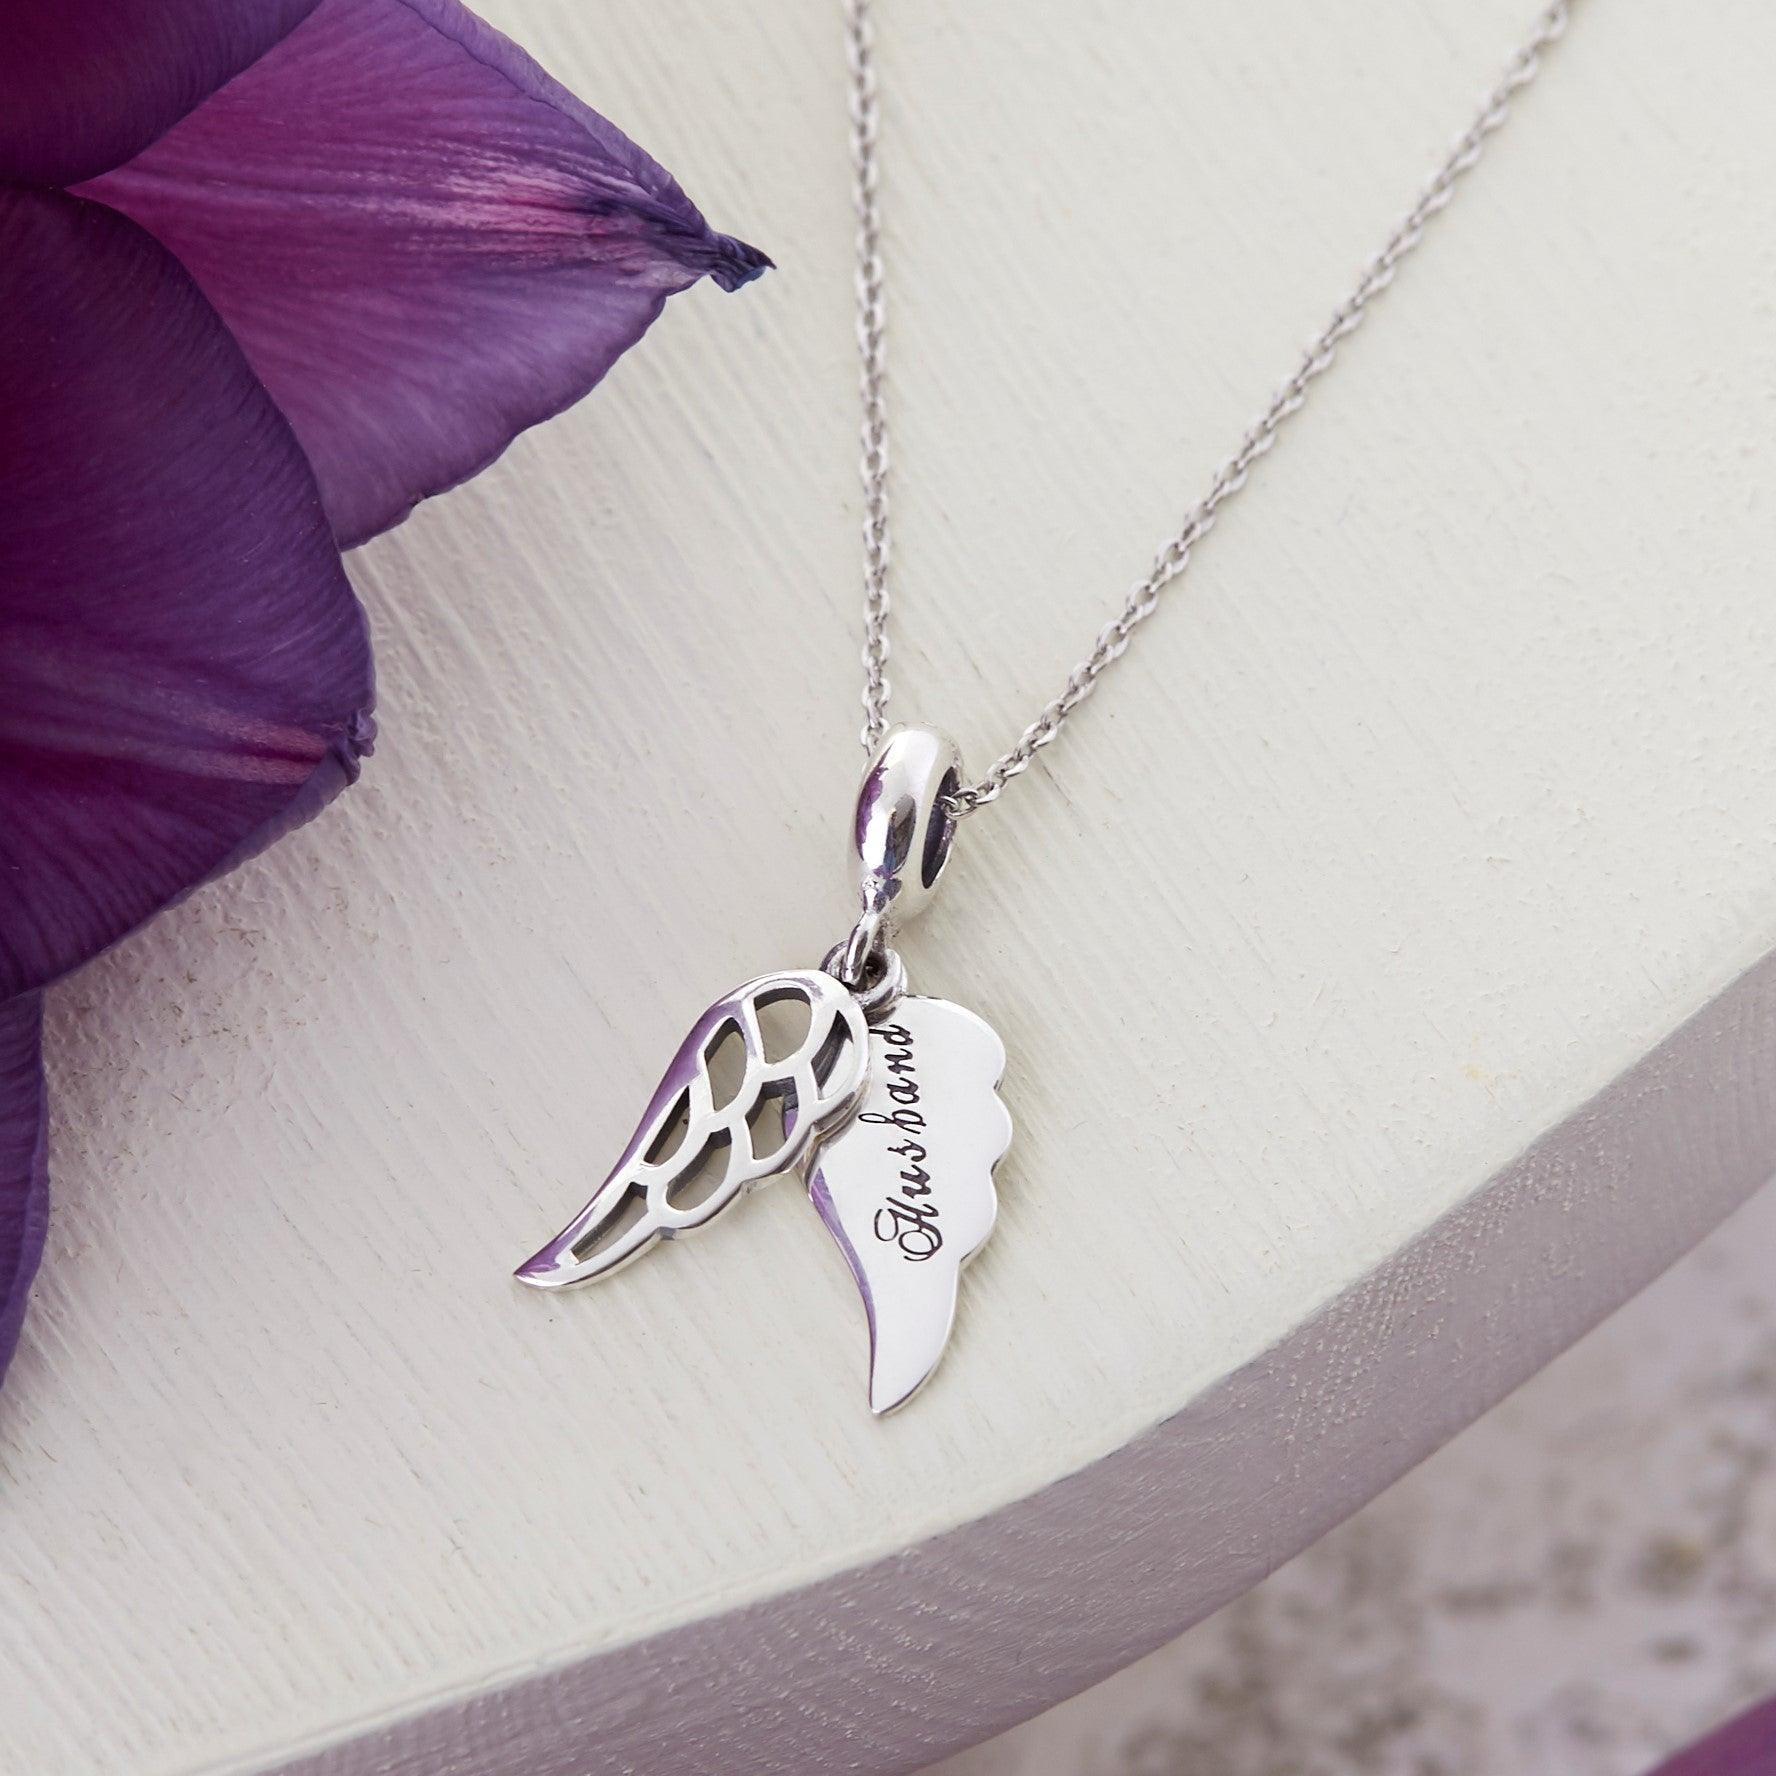 Silver Chain Necklace | Extendable Silver Chain | The Bee Charm